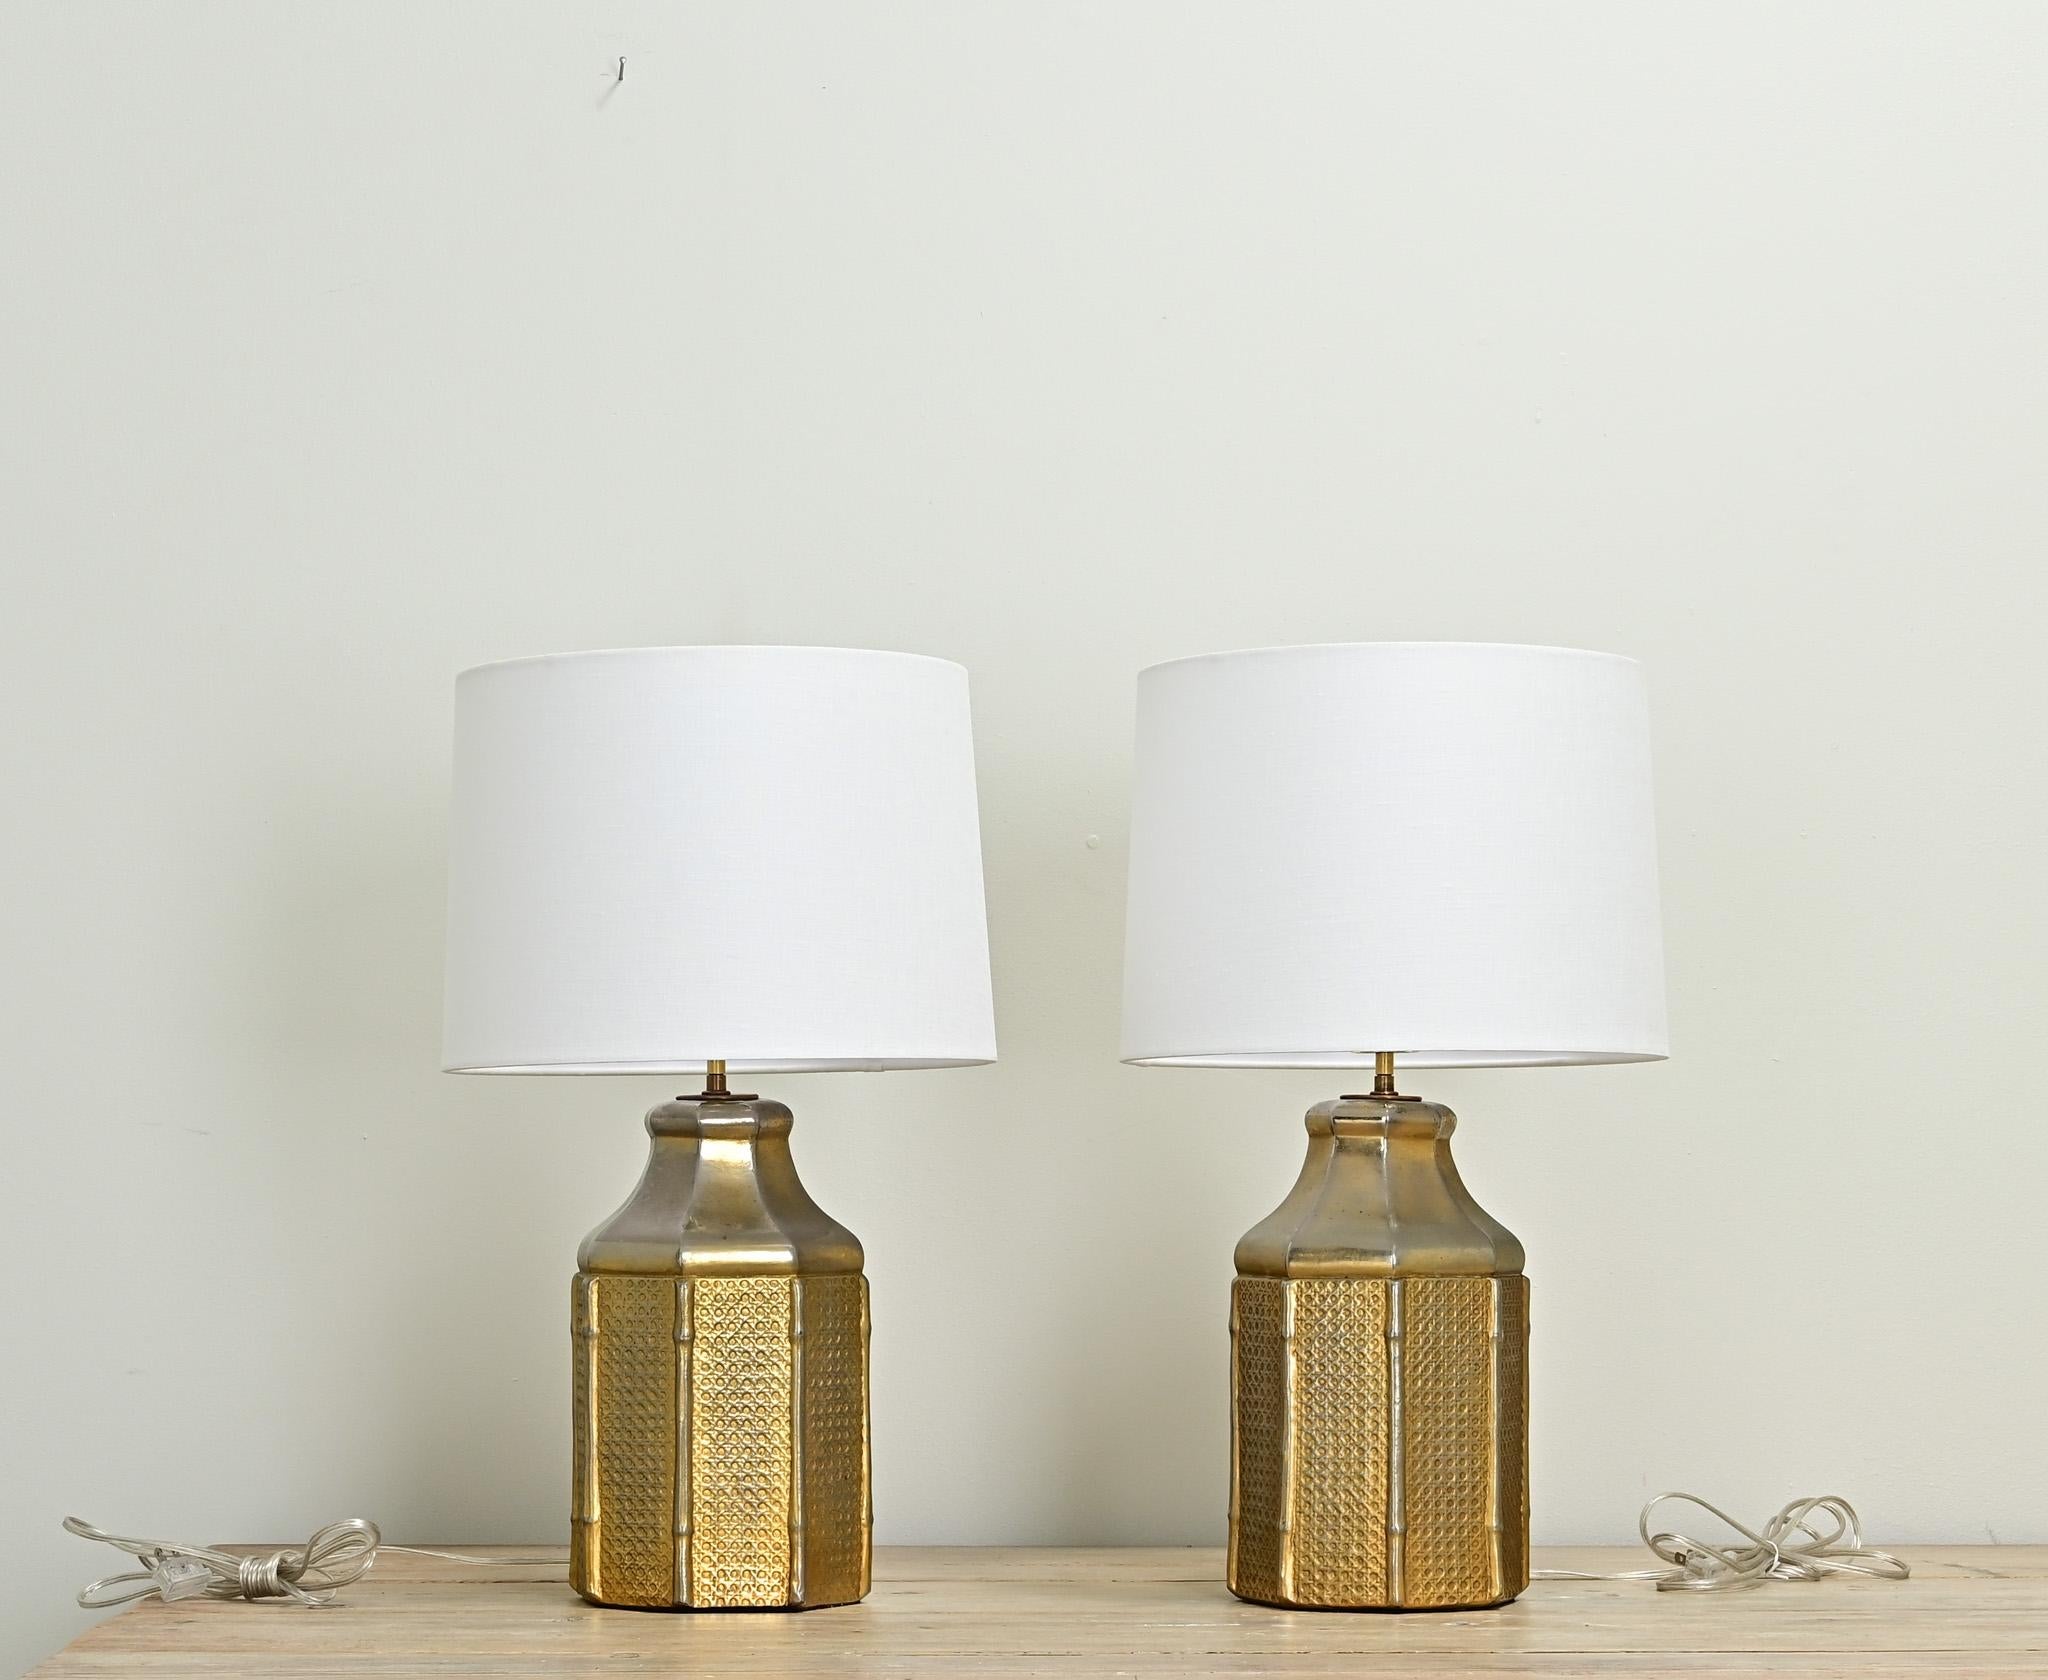 A vintage pair of faux cane and bamboo lamps made of metal. Each lamp is hexagonal in shape with faux bamboo supports between woven faux cane. New linen drum shades compliment the lamp bases well. This pair of lamps have recently been professionally